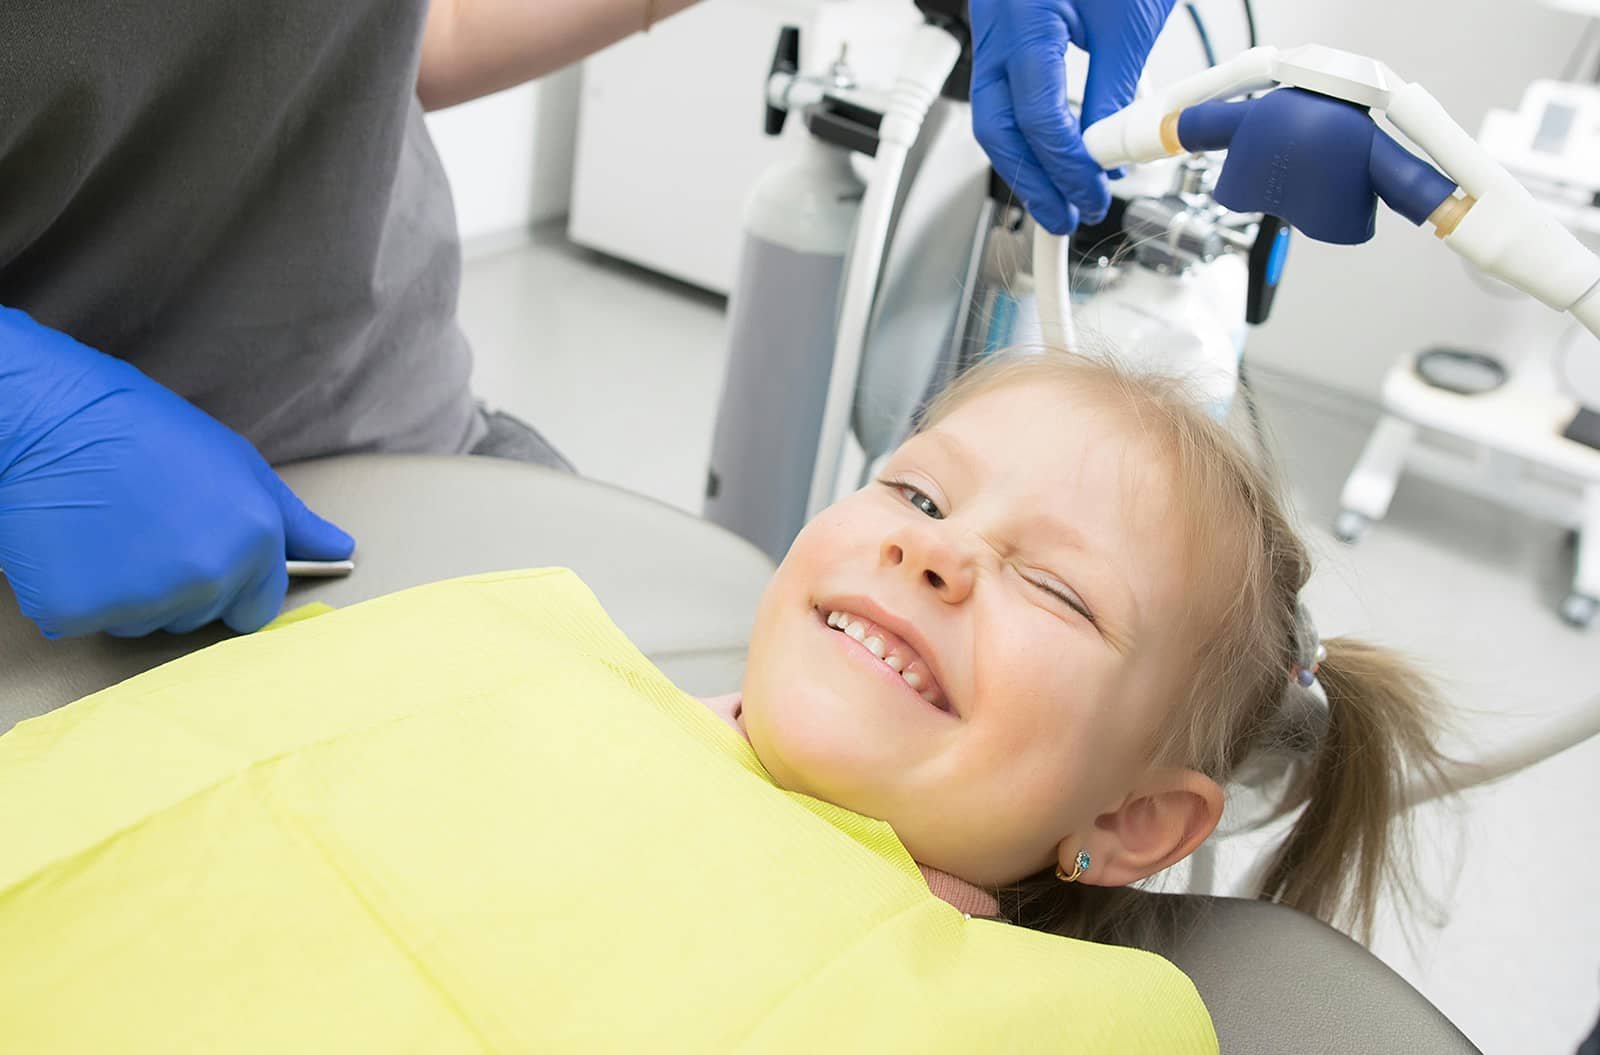 Gentle Pediatric Dental Care at Maral Dental Clinic in Scarborough, ON